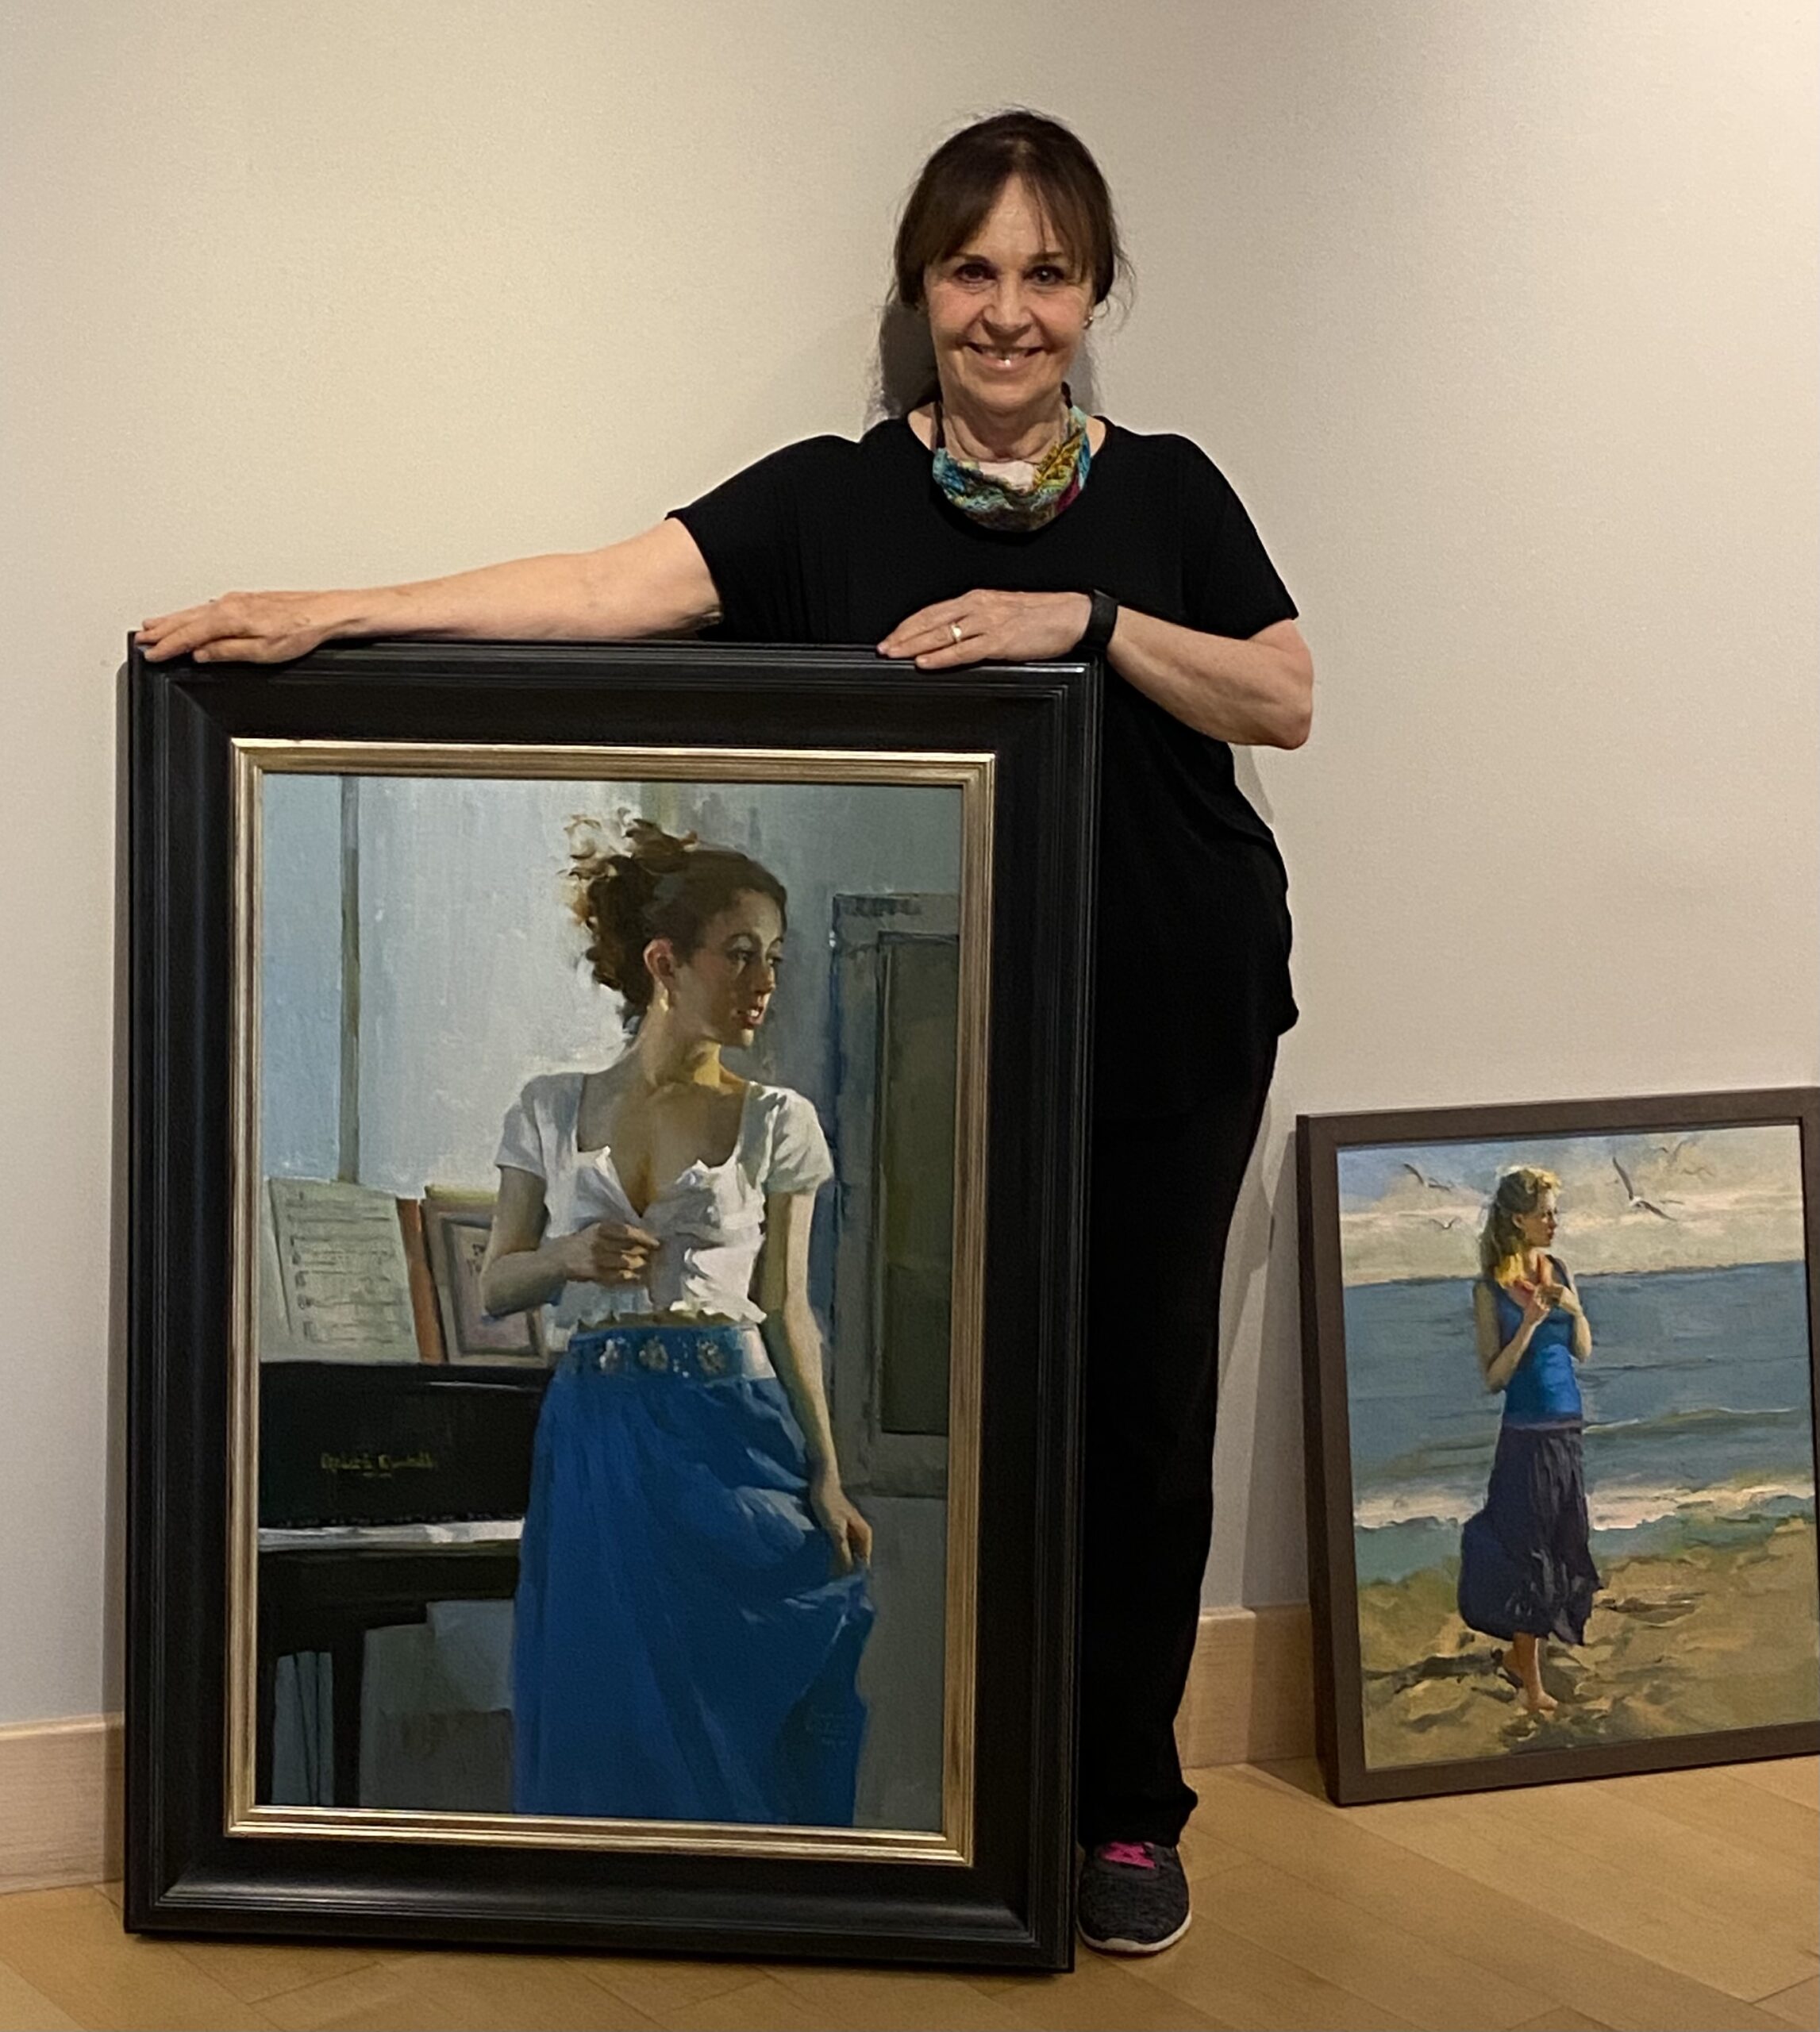 Nancy Seamons Crookston with one of her paintings